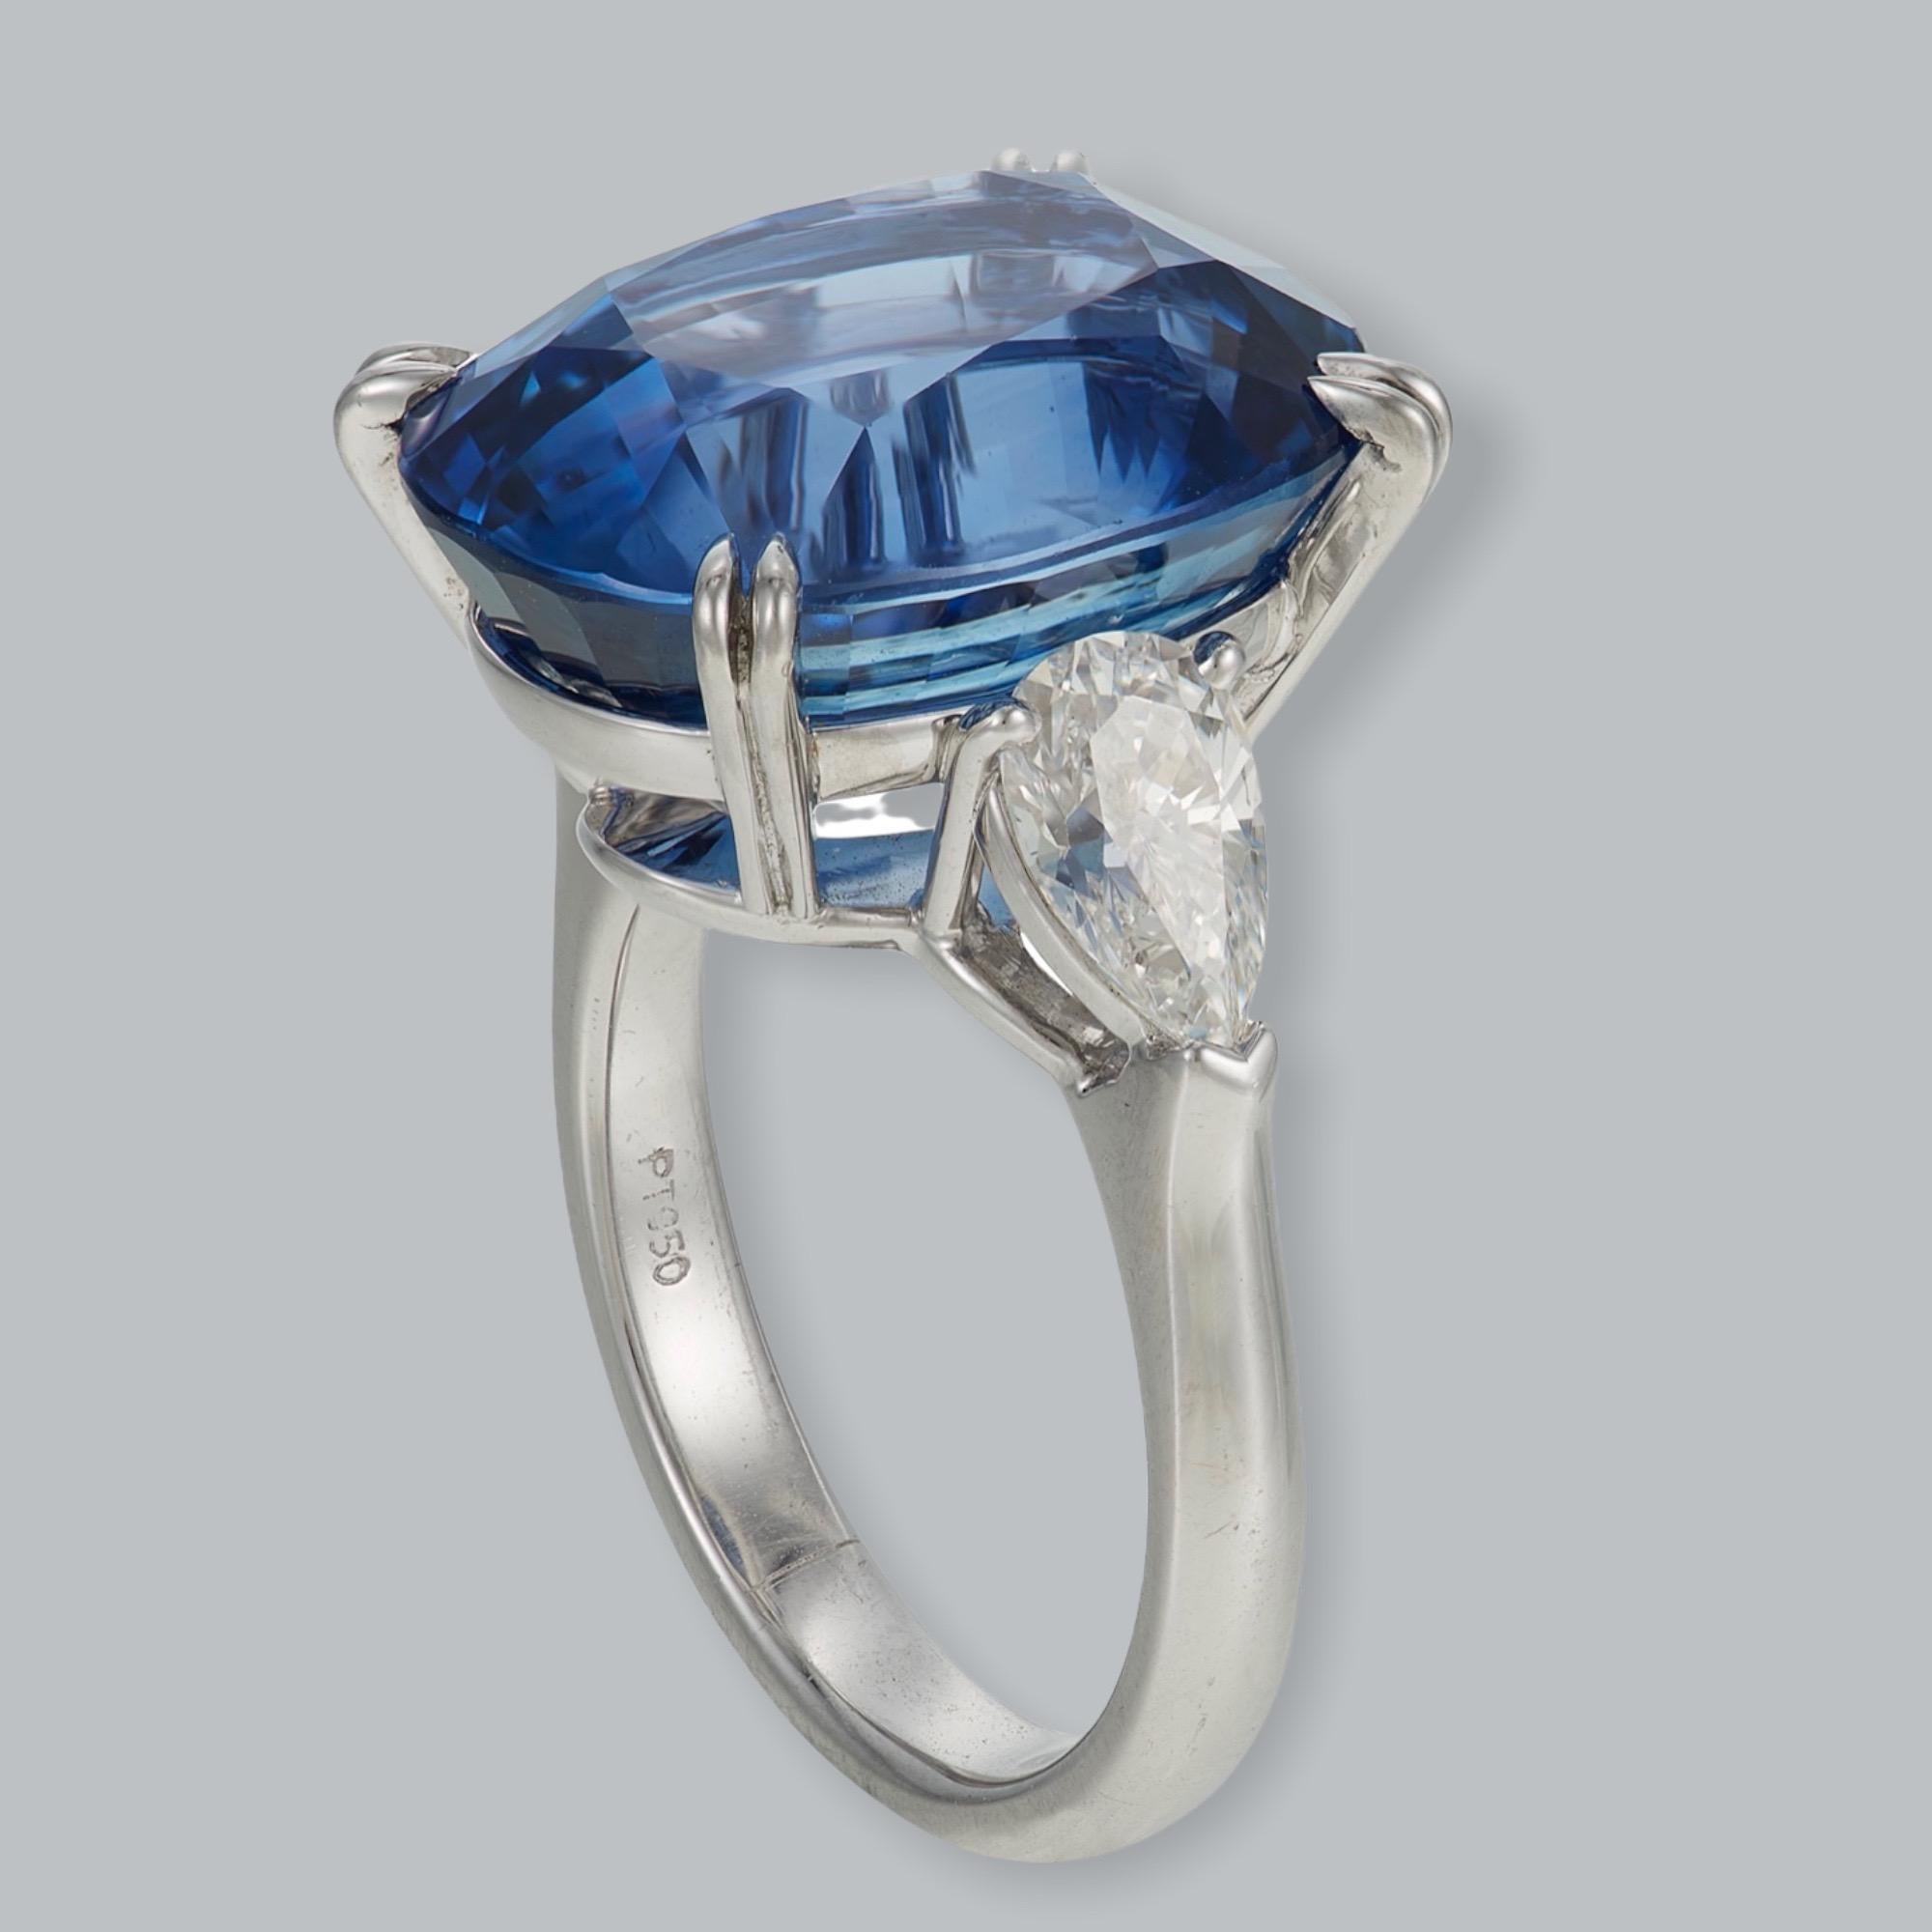 Stunning 16.12ct mixed oval cut sapphire from Sri Lanka accented with 1.20cts of pear shaped diamonds beautifully set in platinum. Wear this on your right or left hand and it will be a show stopper.